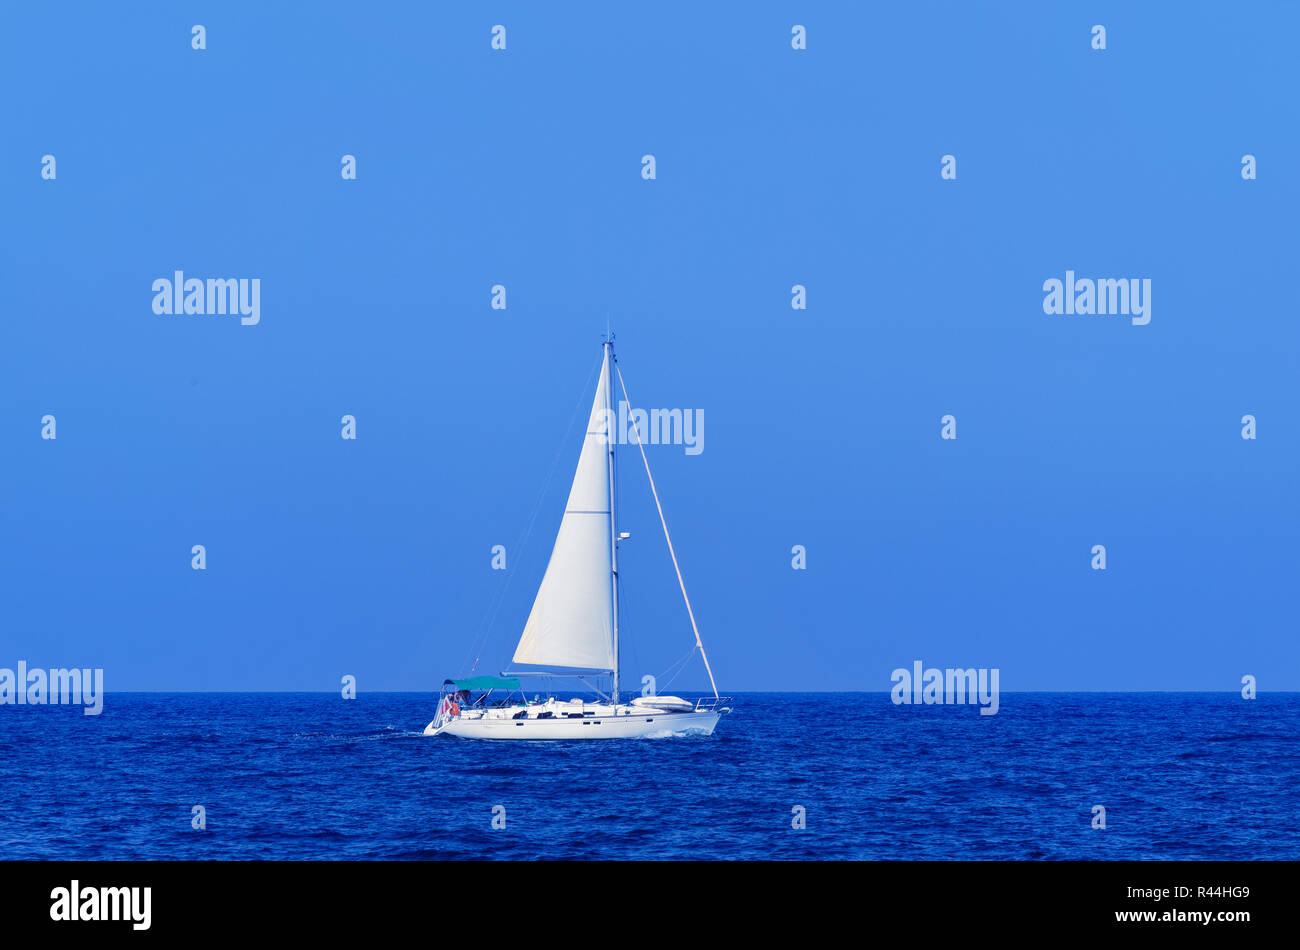 Single white yacht in open sea against clear blue sky. European island state of Malta Stock Photo